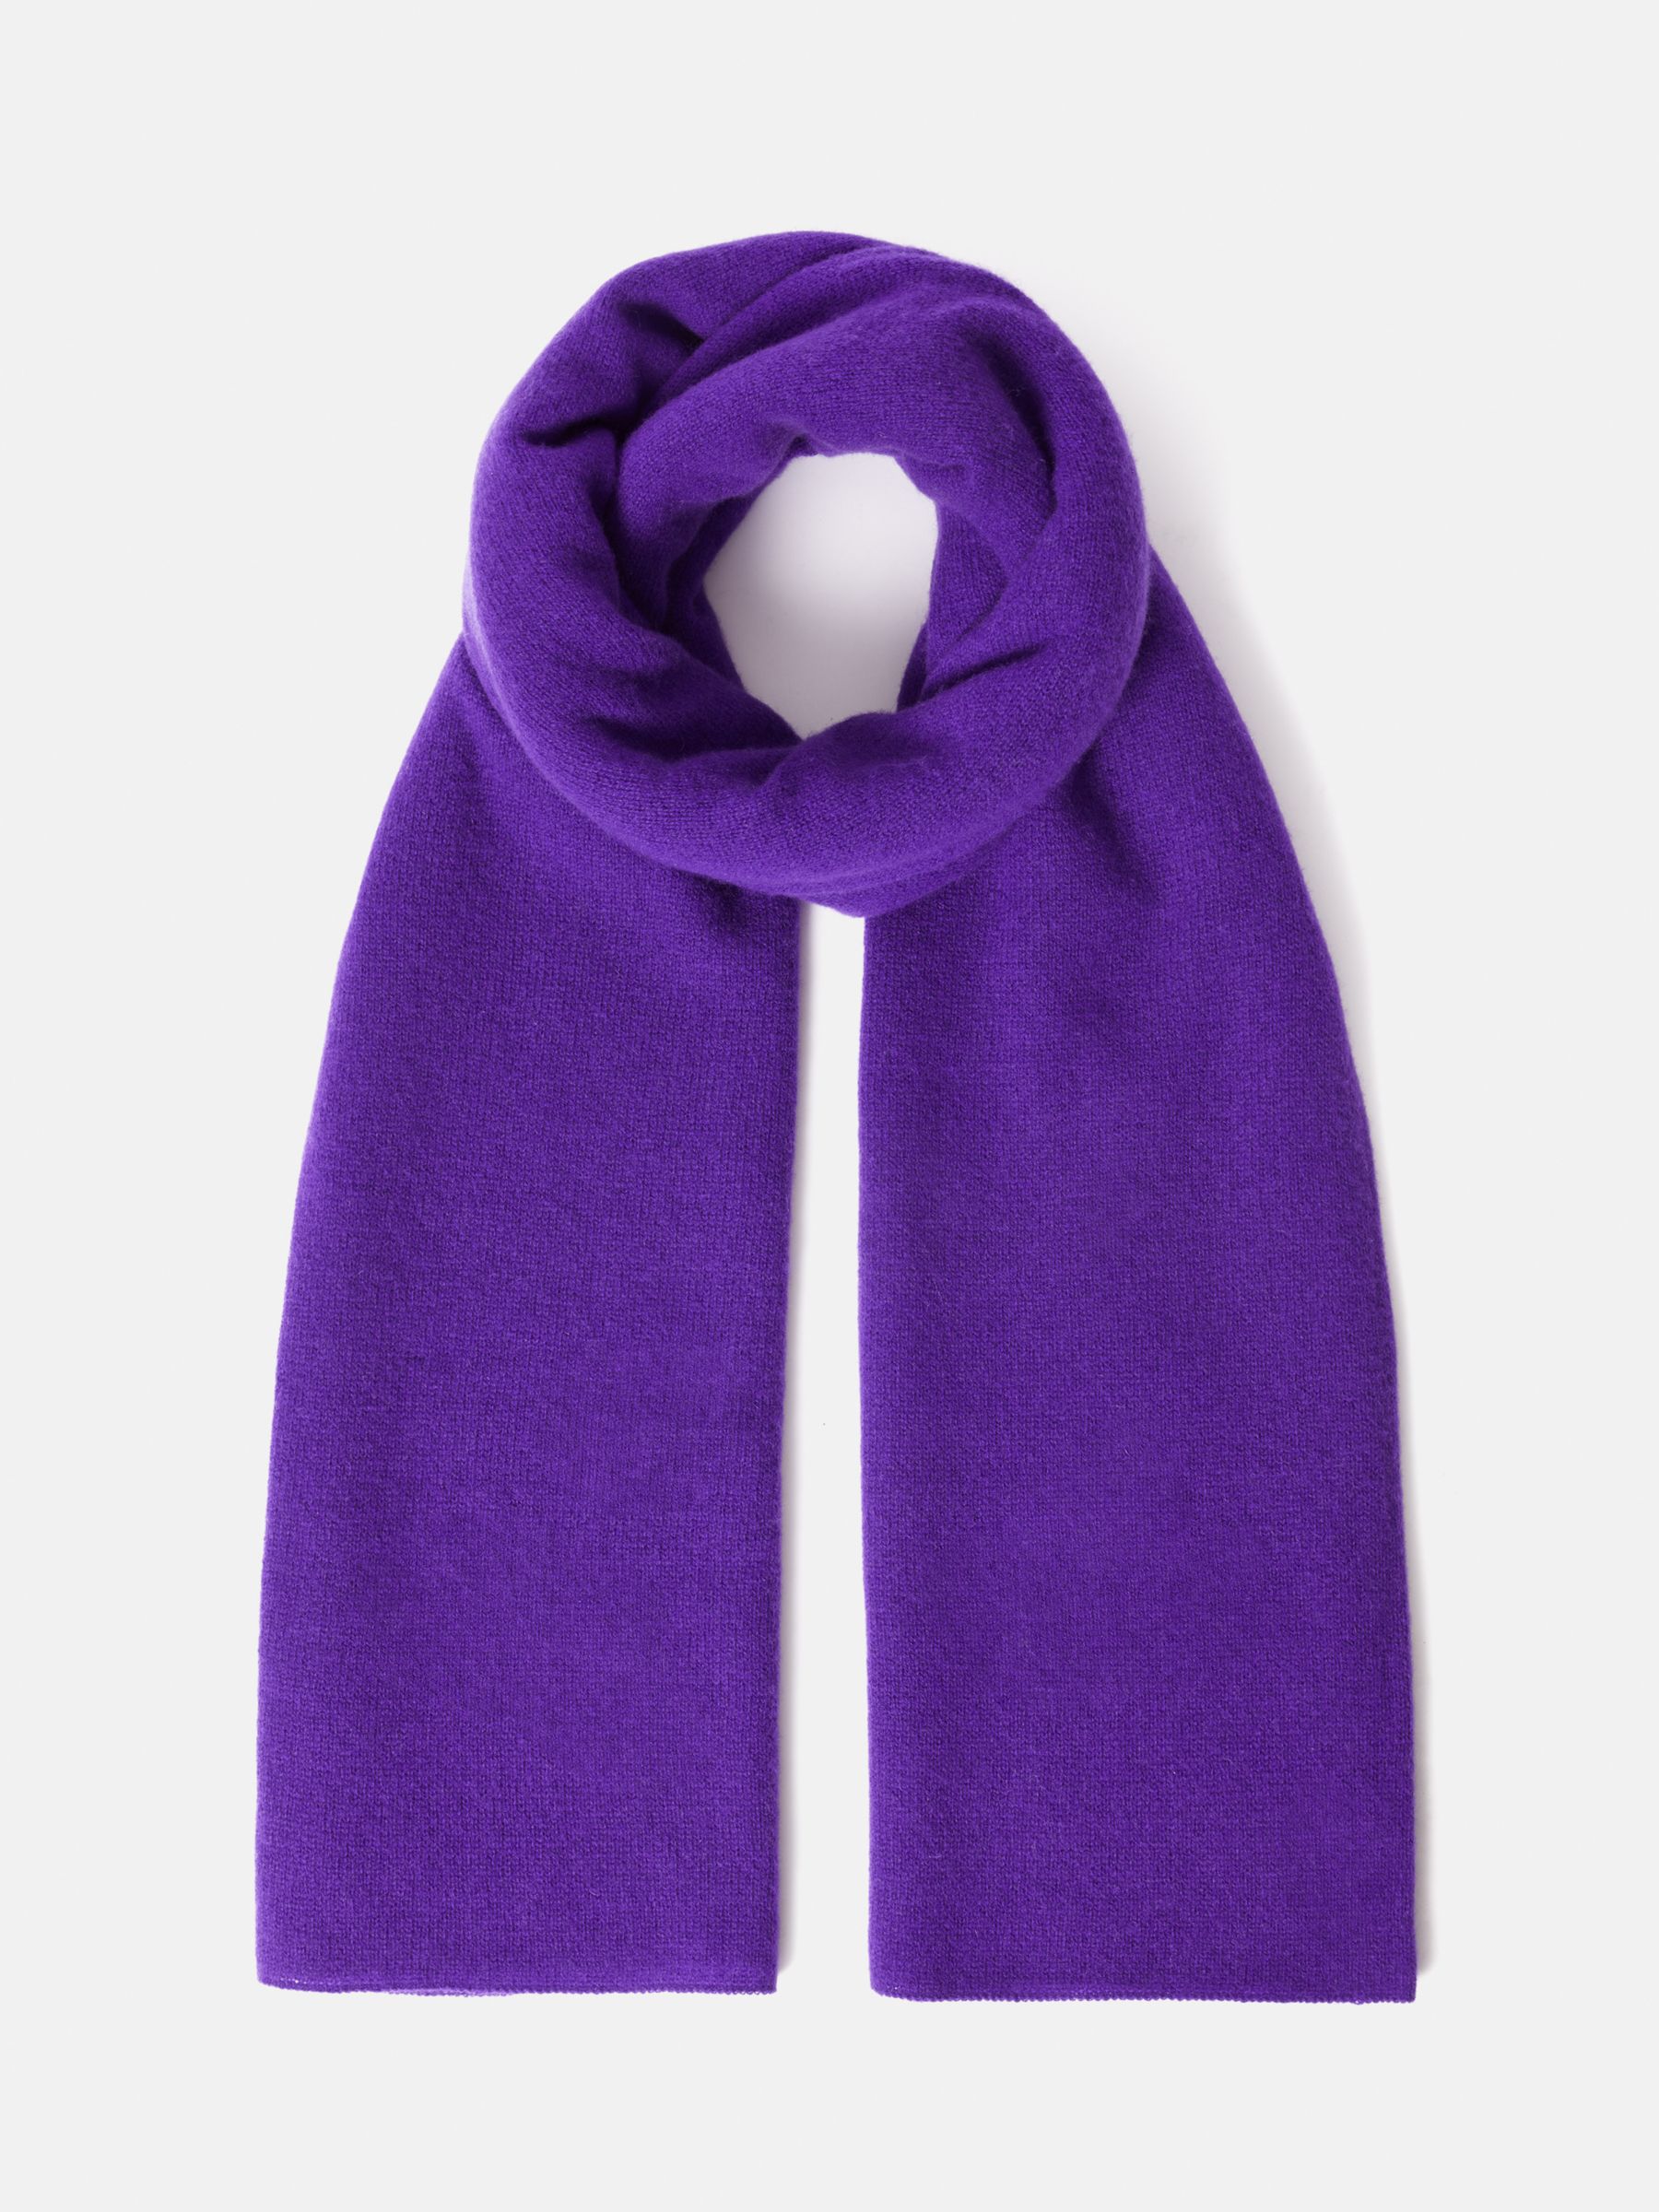 Jigsaw Wool and Cashmere Scarf, Purple, One Size